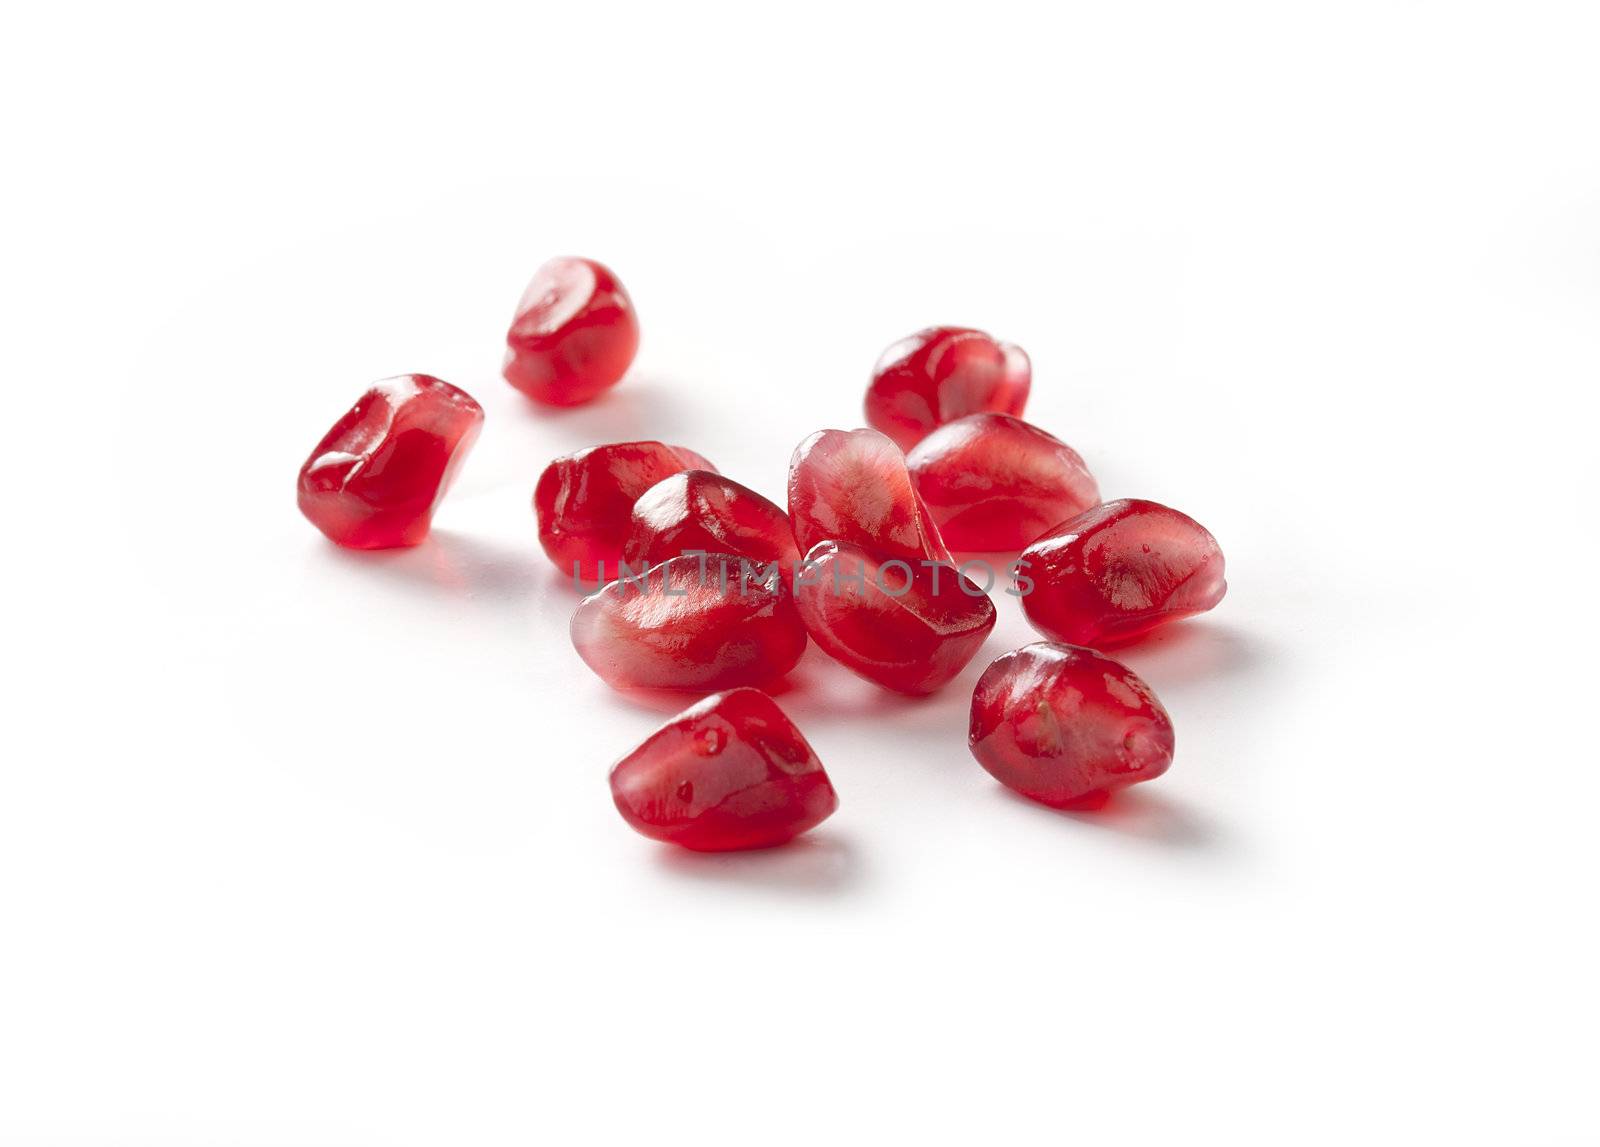 Handful of red seeds of pomegranate on the white background